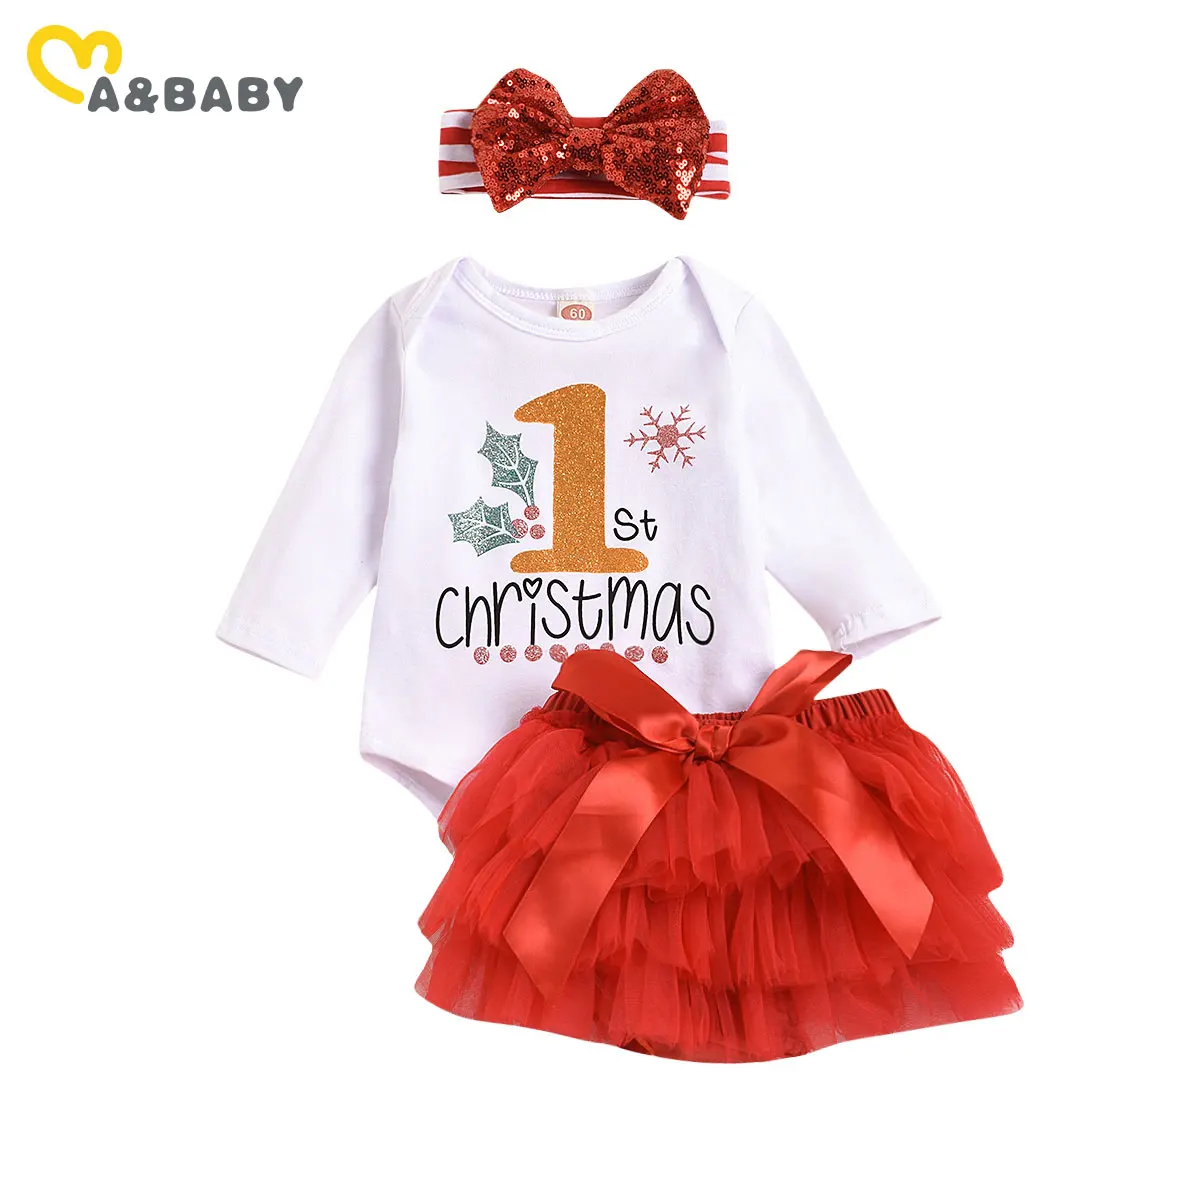 

Ma&Baby 3-18M My 1st Christmas Newborn Infant Baby Girl Clothes Set Soft Long Sleeve Romper Tutu Sequins Skirts Xmas Outfits